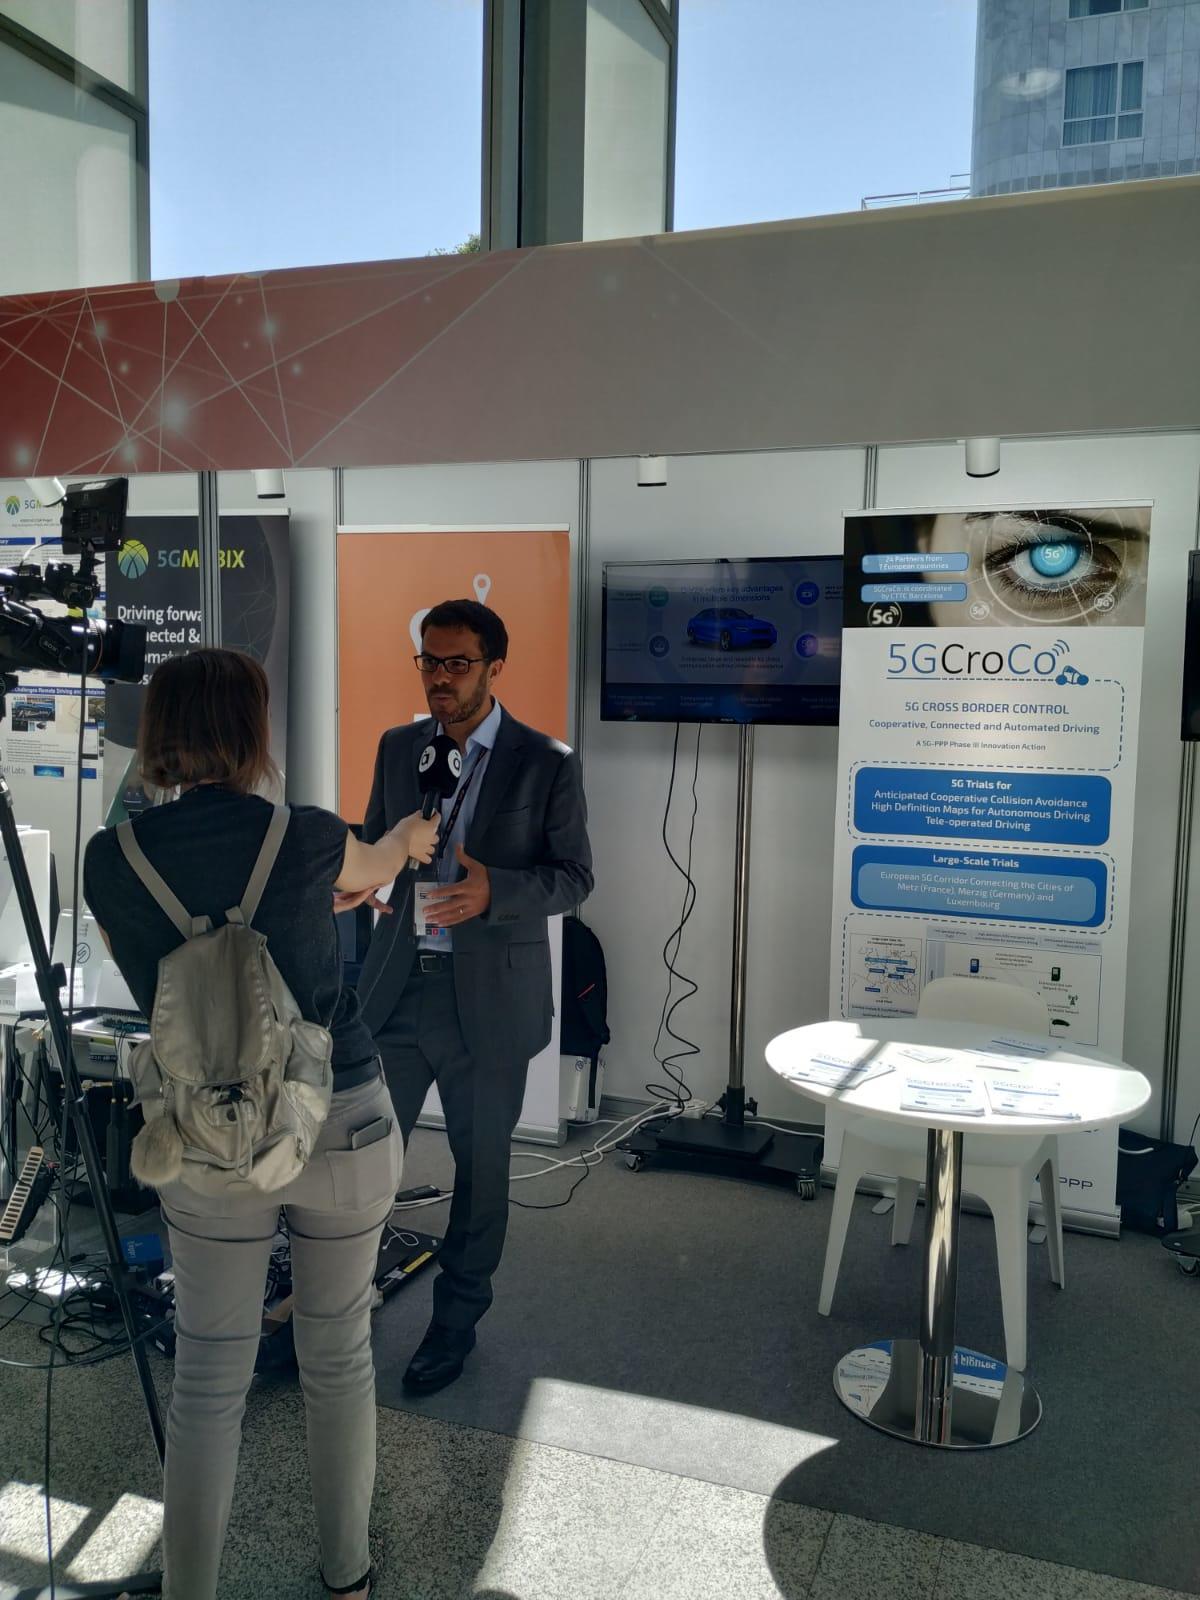 EU 5G Cross-Border Projects Interview at Booth at EuCNC